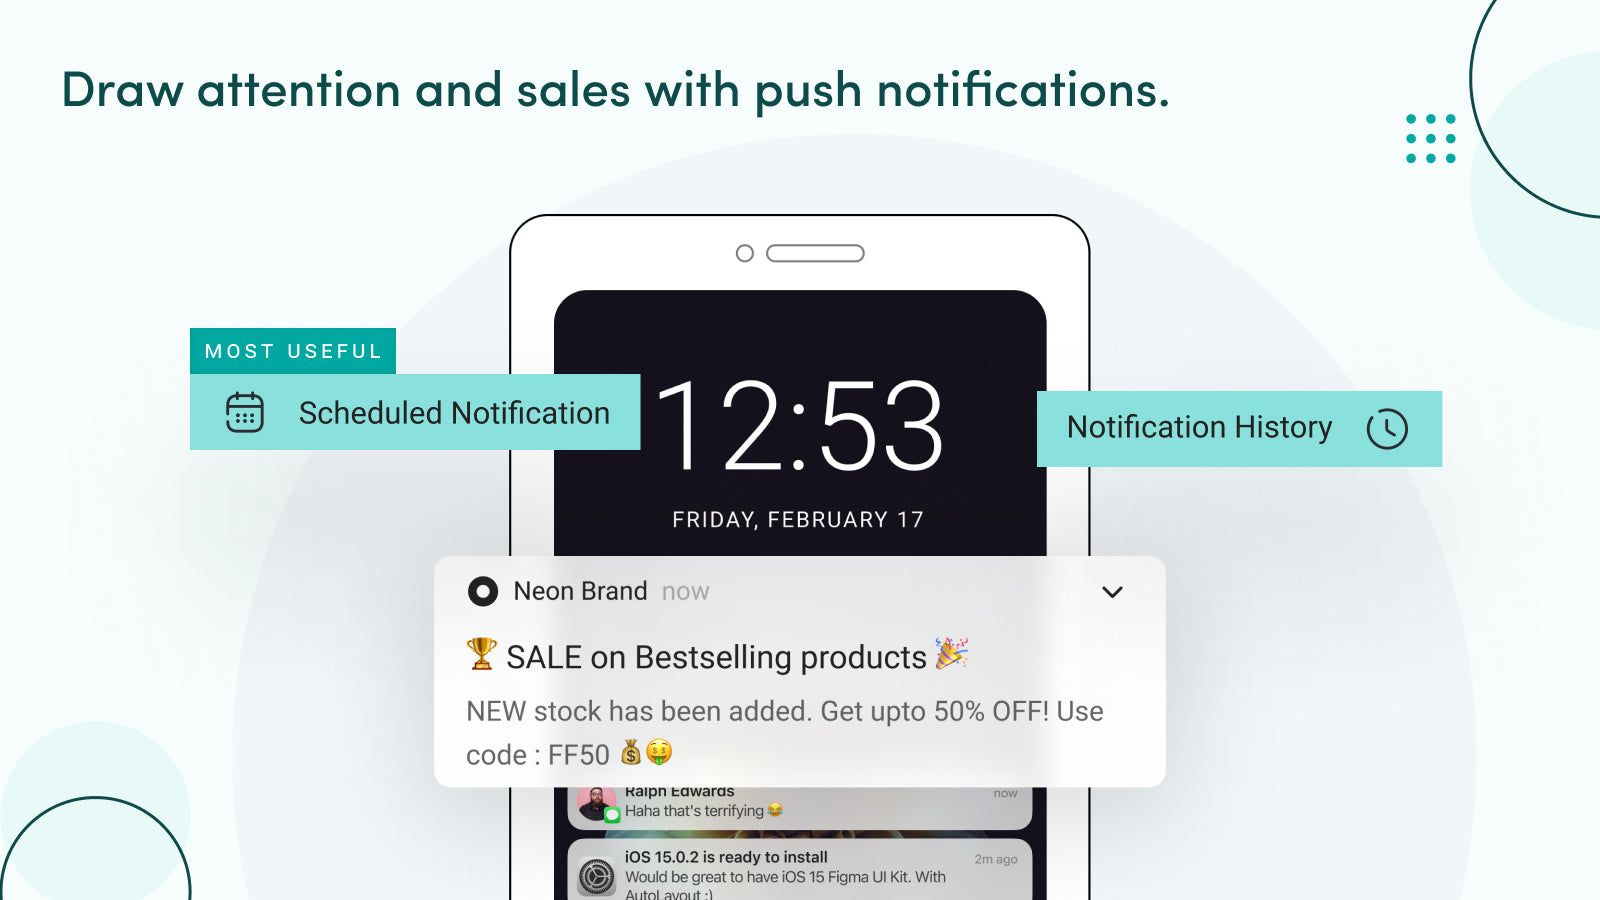 Use the Mobile App to draw attention and sales.